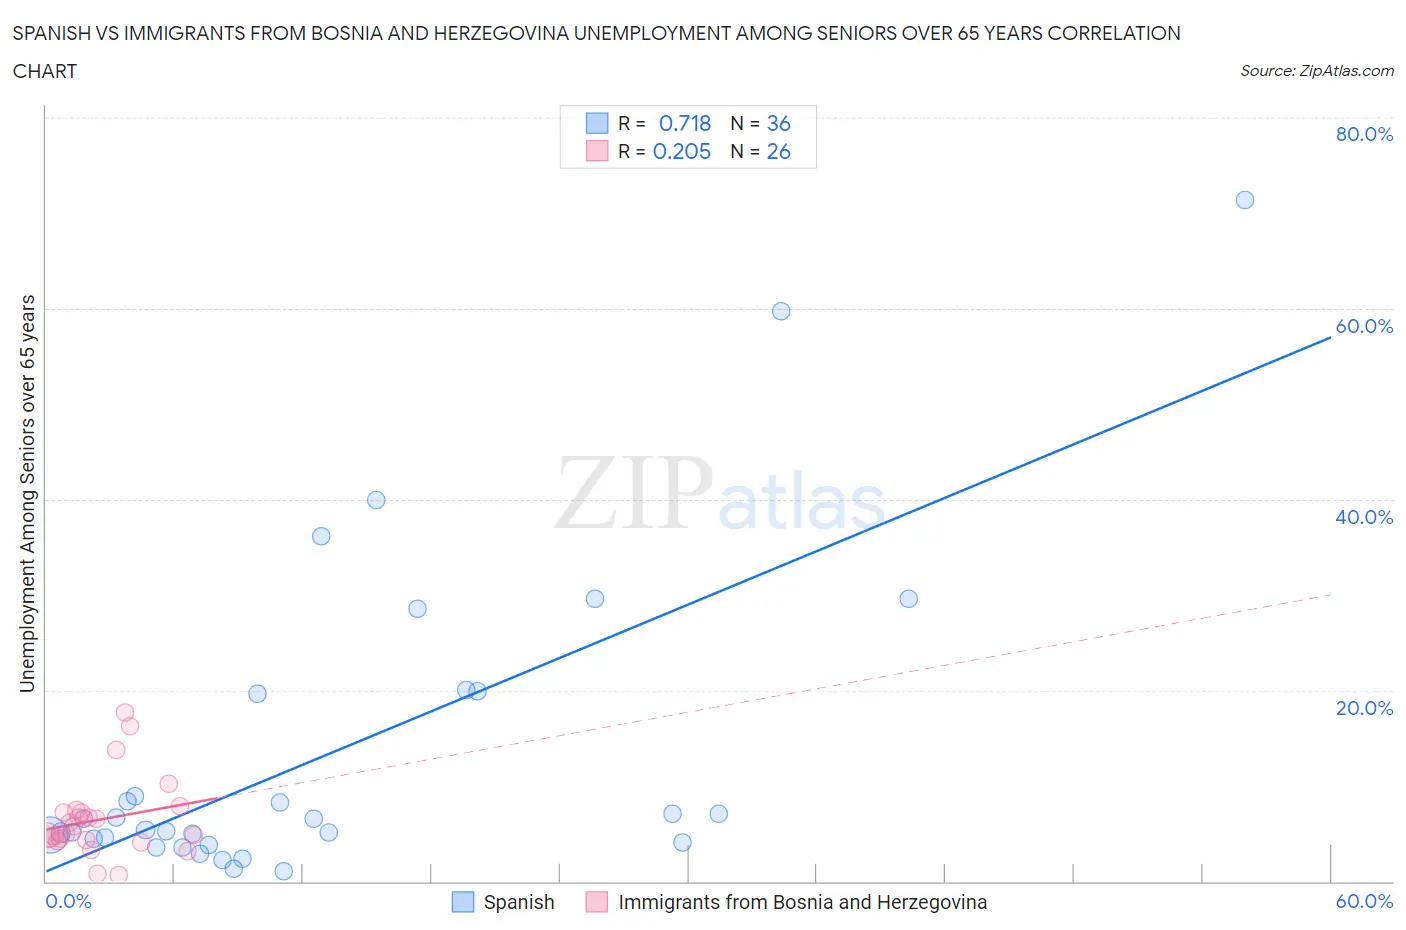 Spanish vs Immigrants from Bosnia and Herzegovina Unemployment Among Seniors over 65 years